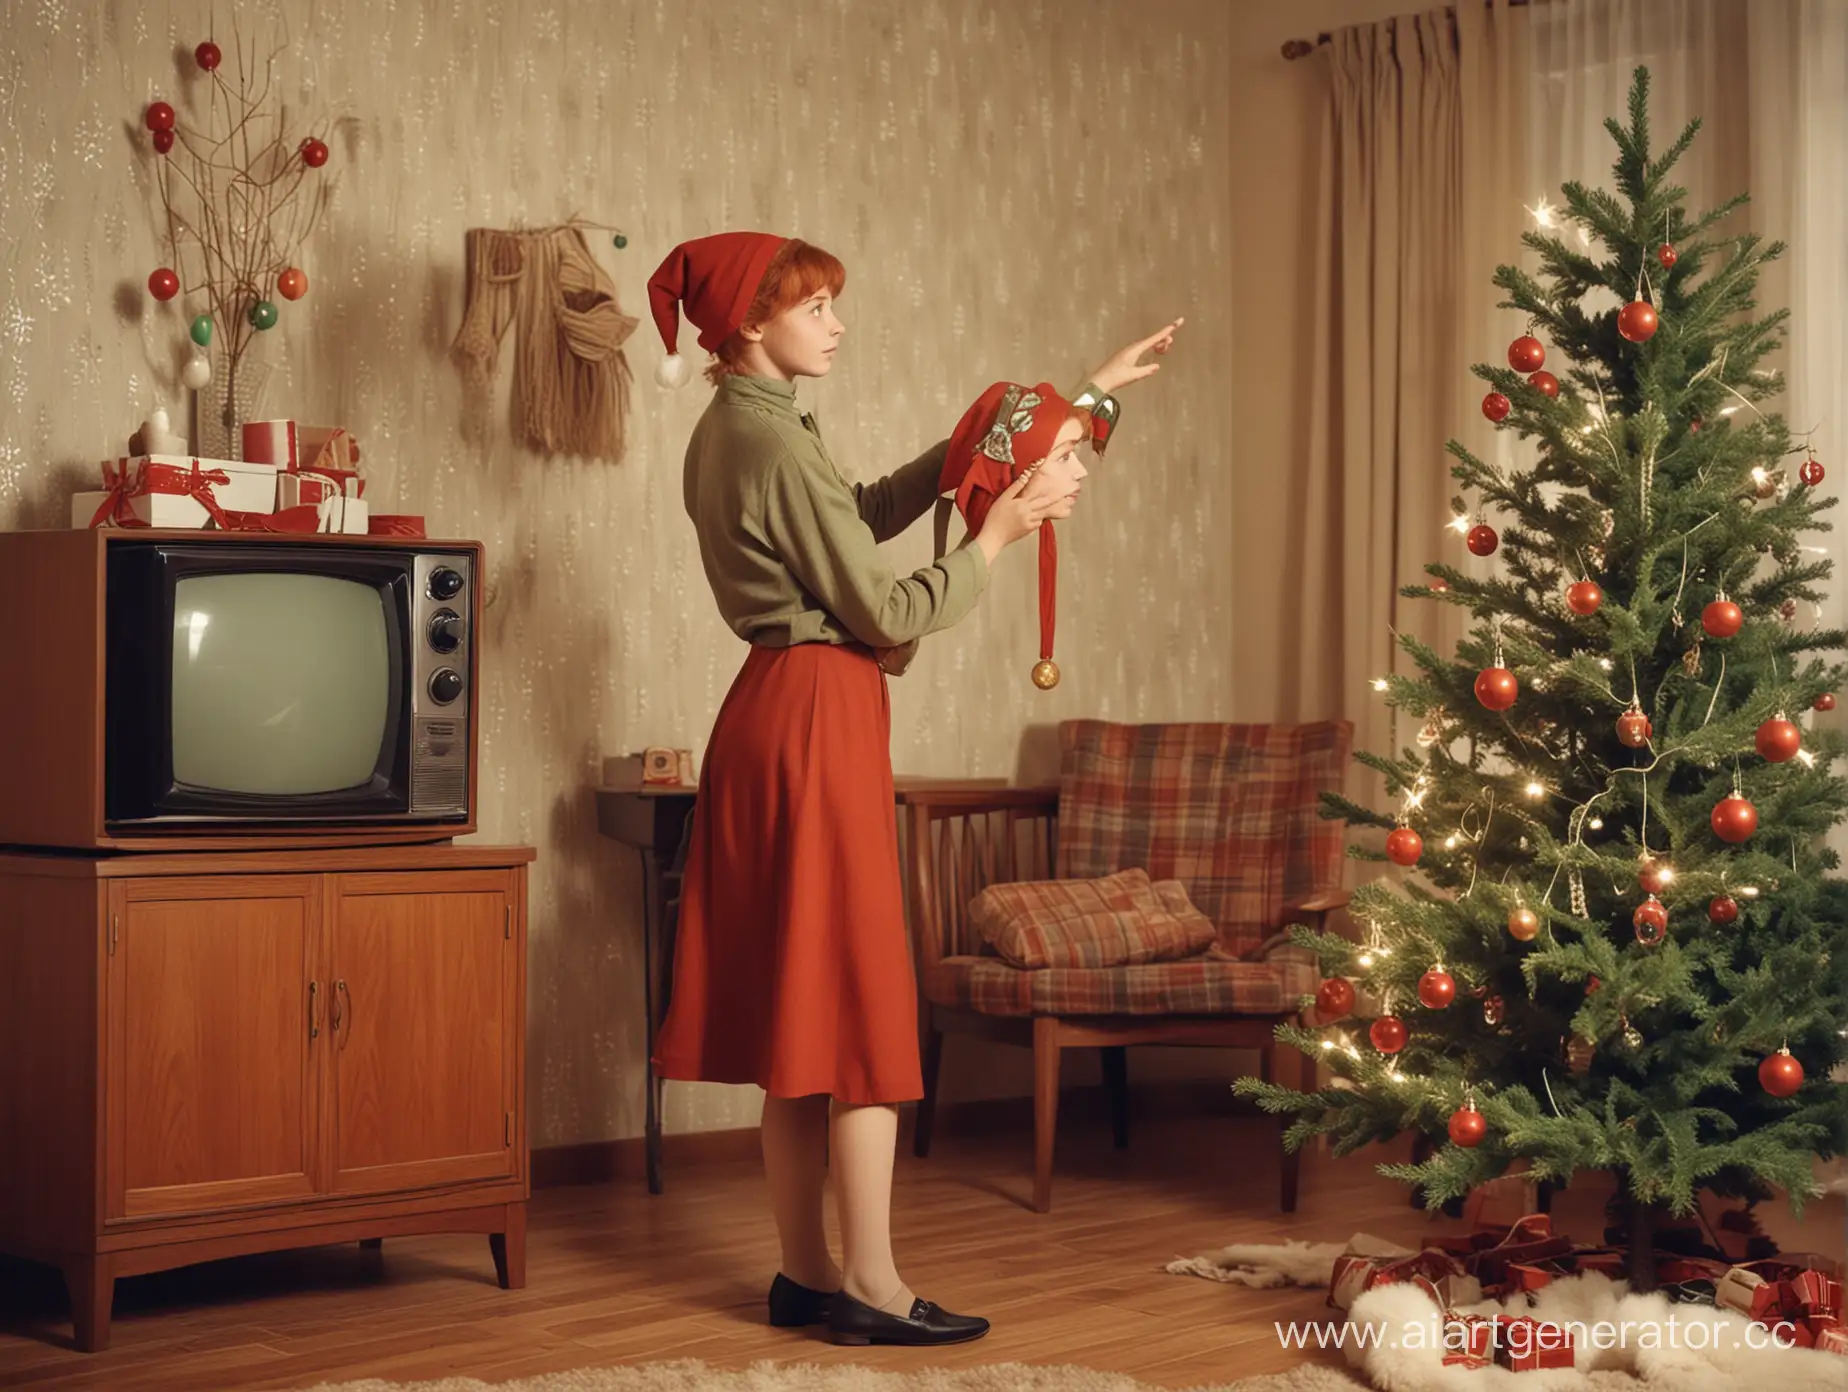 Redhaired-Elf-Girl-Decorating-Christmas-Tree-in-Cozy-Soviet-Apartment